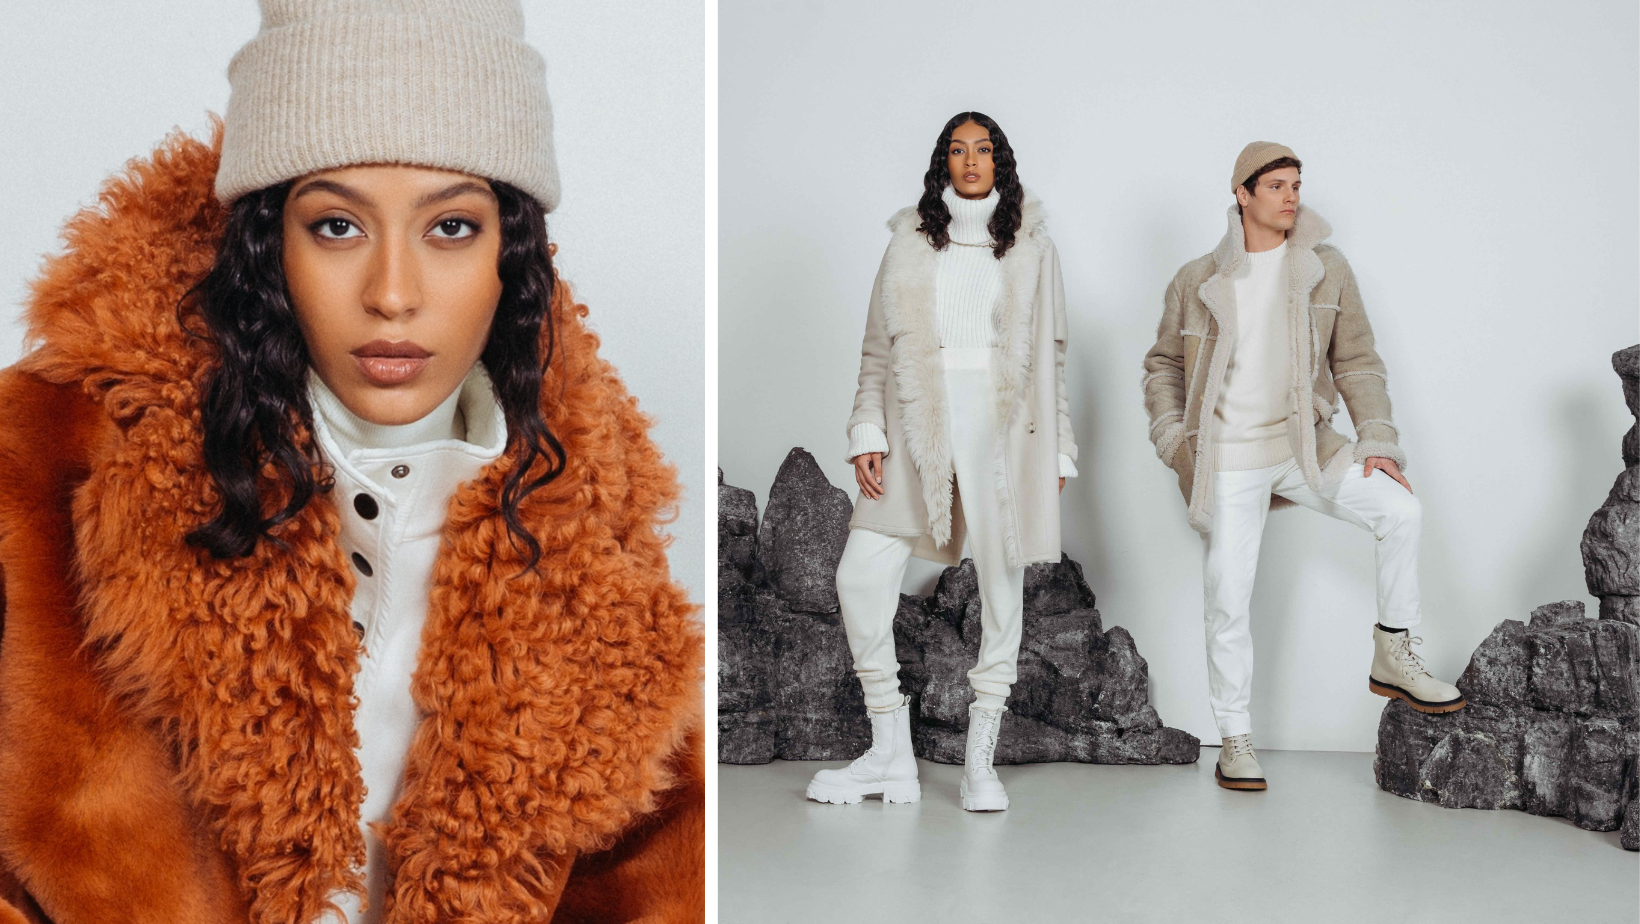 FW21 Campaign. From left to right; Alice: umber coloured curly reversible shearling coat  reverses to Toscana sheepskin side. August :IVORY NAPPA MERINO TOSCANA.Reversible. Dropped shoulder. Relaxed armhole and sleeve, loose-fit through the torso. 36 in. Lyle:  Cement Colour. Fits true to size, Reversible. Comfortable fit in the shoulders and chest, straight cut through the torso. Looser fit in the shoulders, chest and torso when worn wool out,Reversible, Notch lapel, Interior zipper pockets, 31 in.